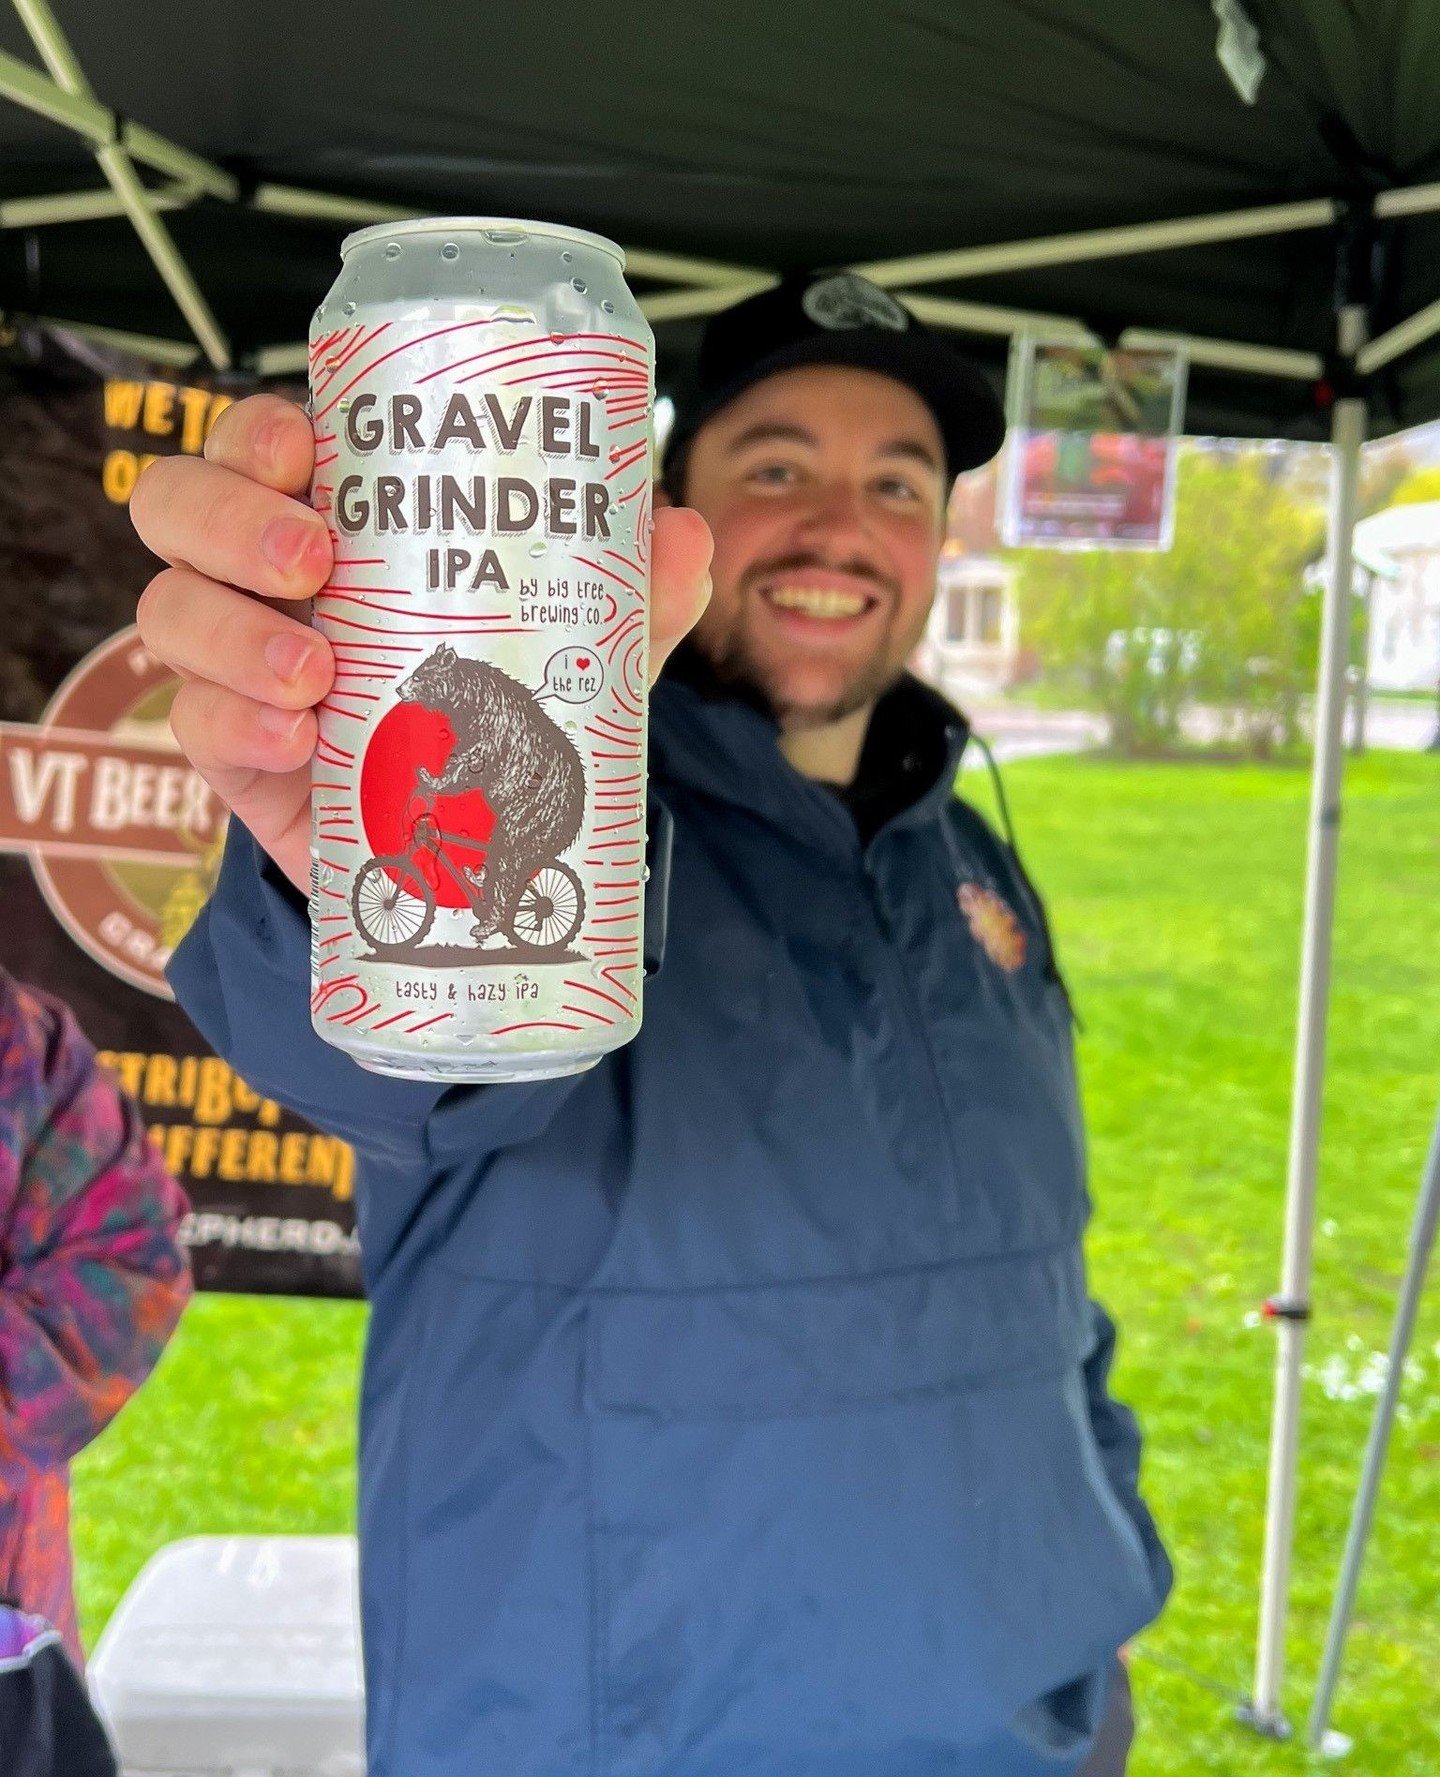 Big thanks to our friends at WATA for putting on an awesome event this past Sunday despite the torrential downpour☔️⁠
⁠
Our team slung brews for the 16th annual WATA Gravel Grinder and kept the good vibes rolling even in the rain. ⁠
⁠
Here's to rolli